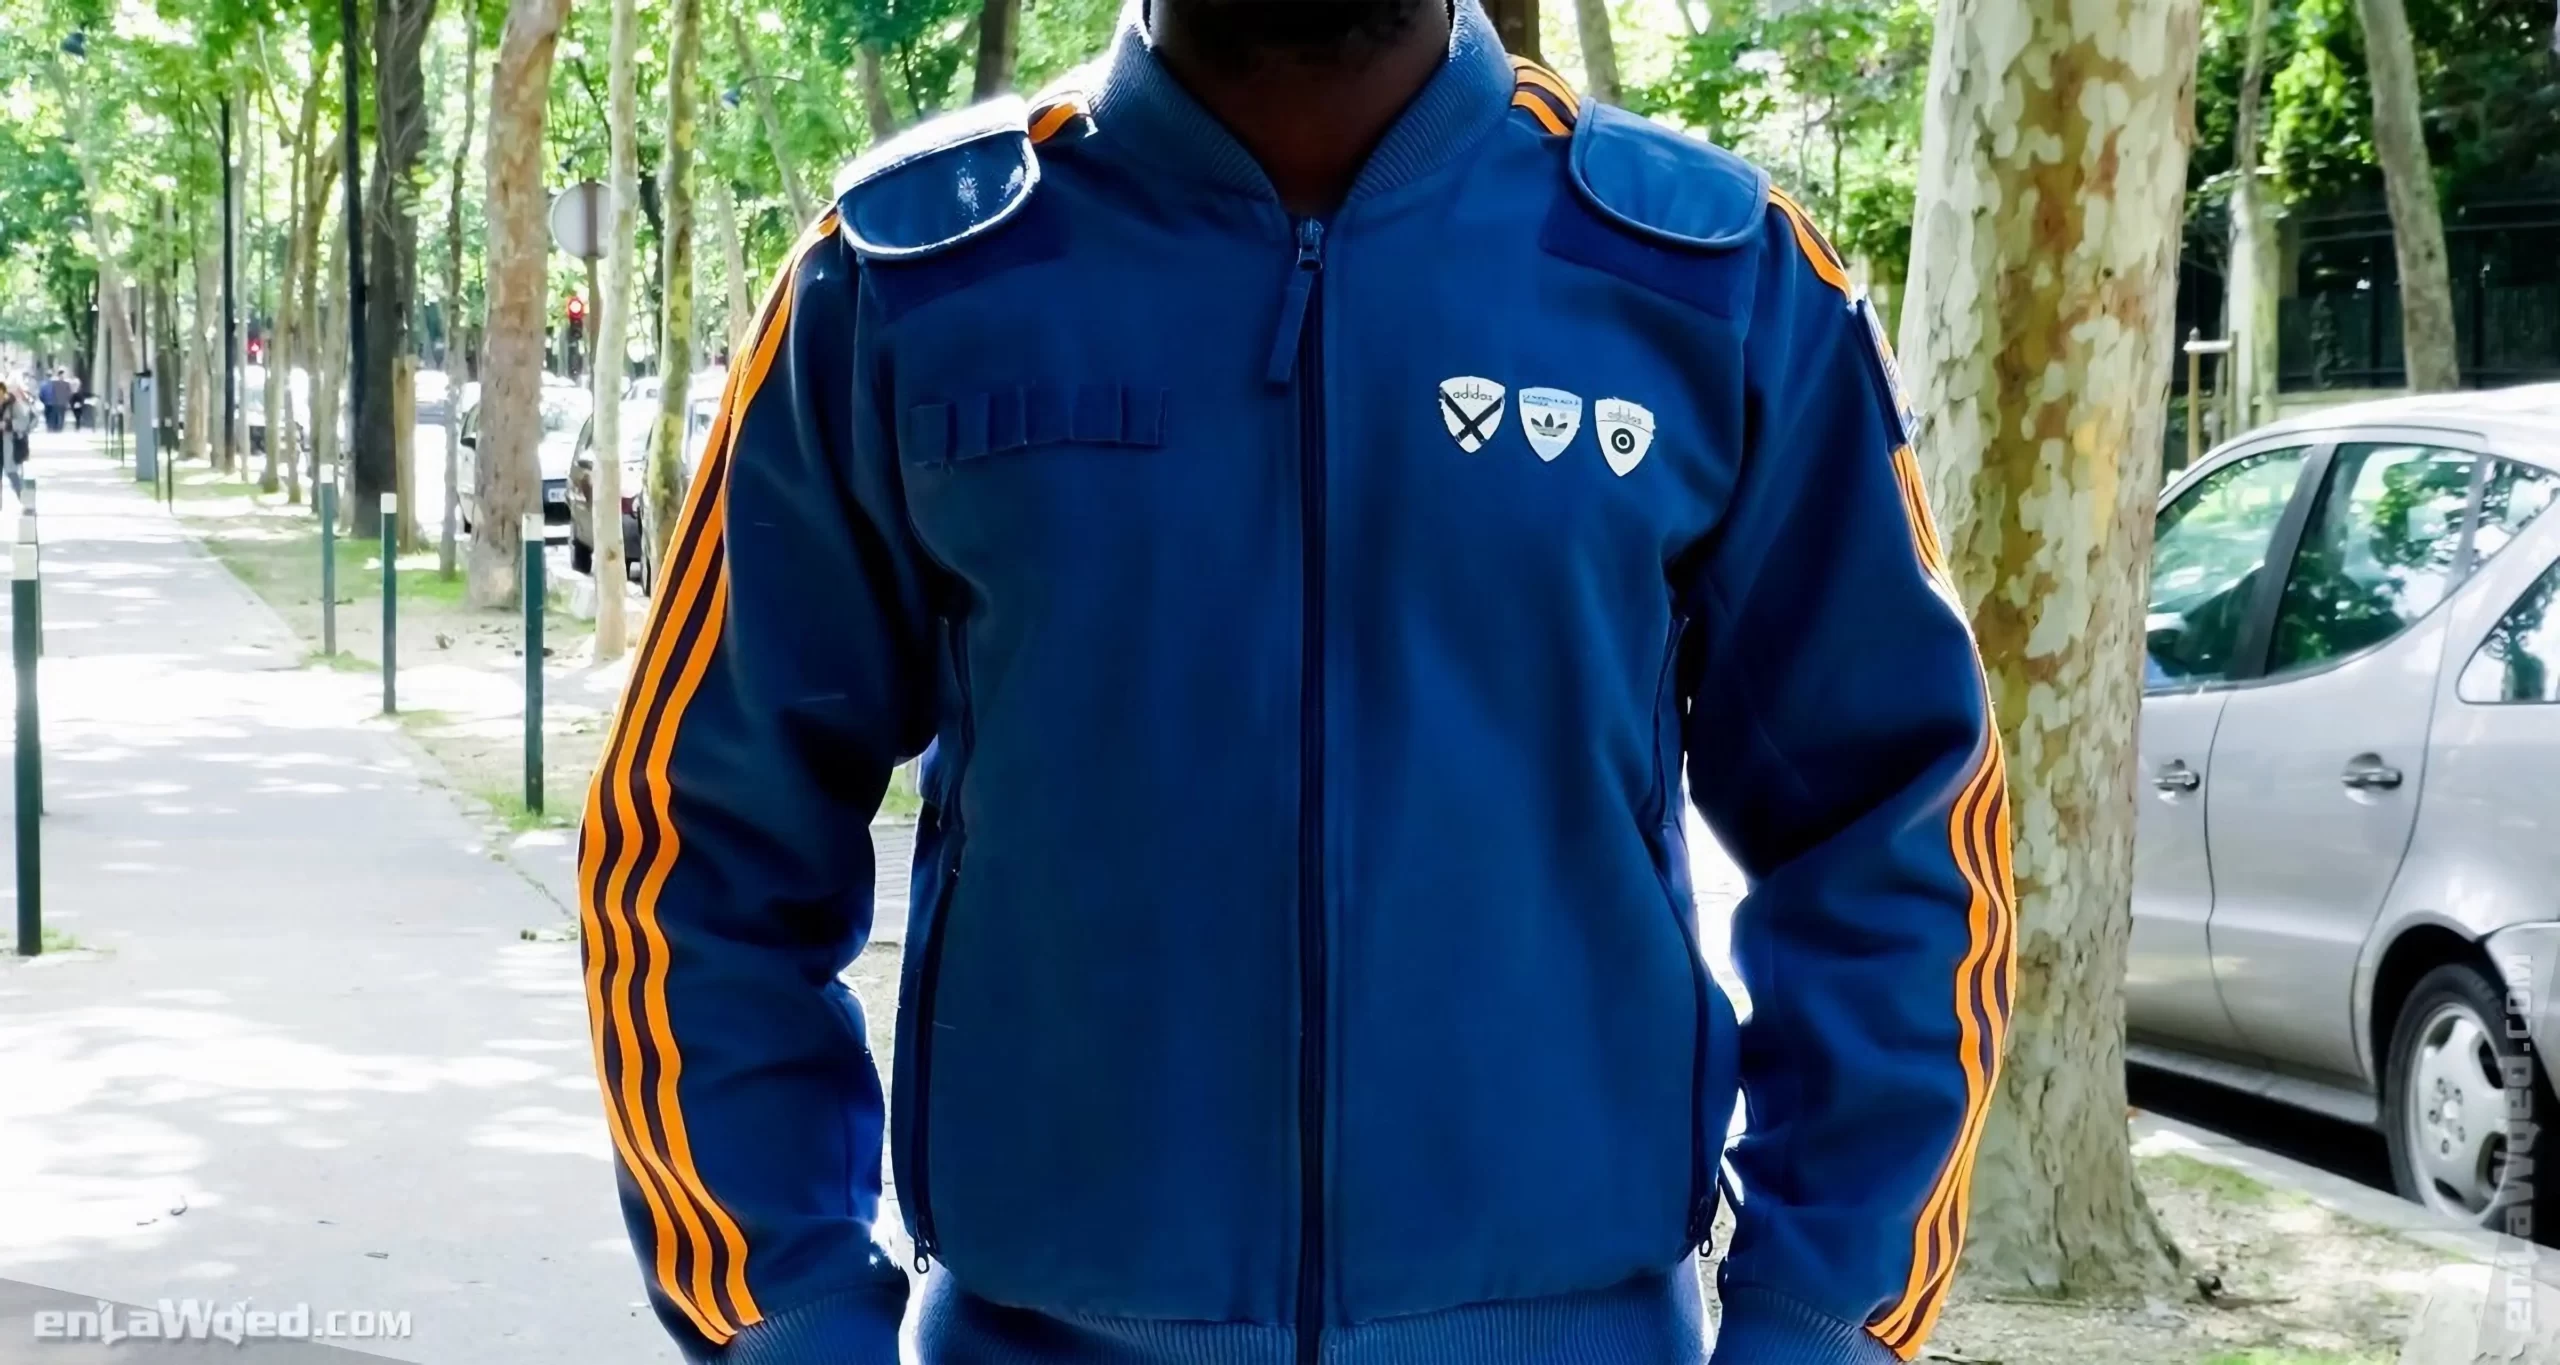 Men’s 2005 Adidas Originals Military Peace Jacket: Unstoppable (EnLawded.com file #lmchcb9mkiwe7235n3n)